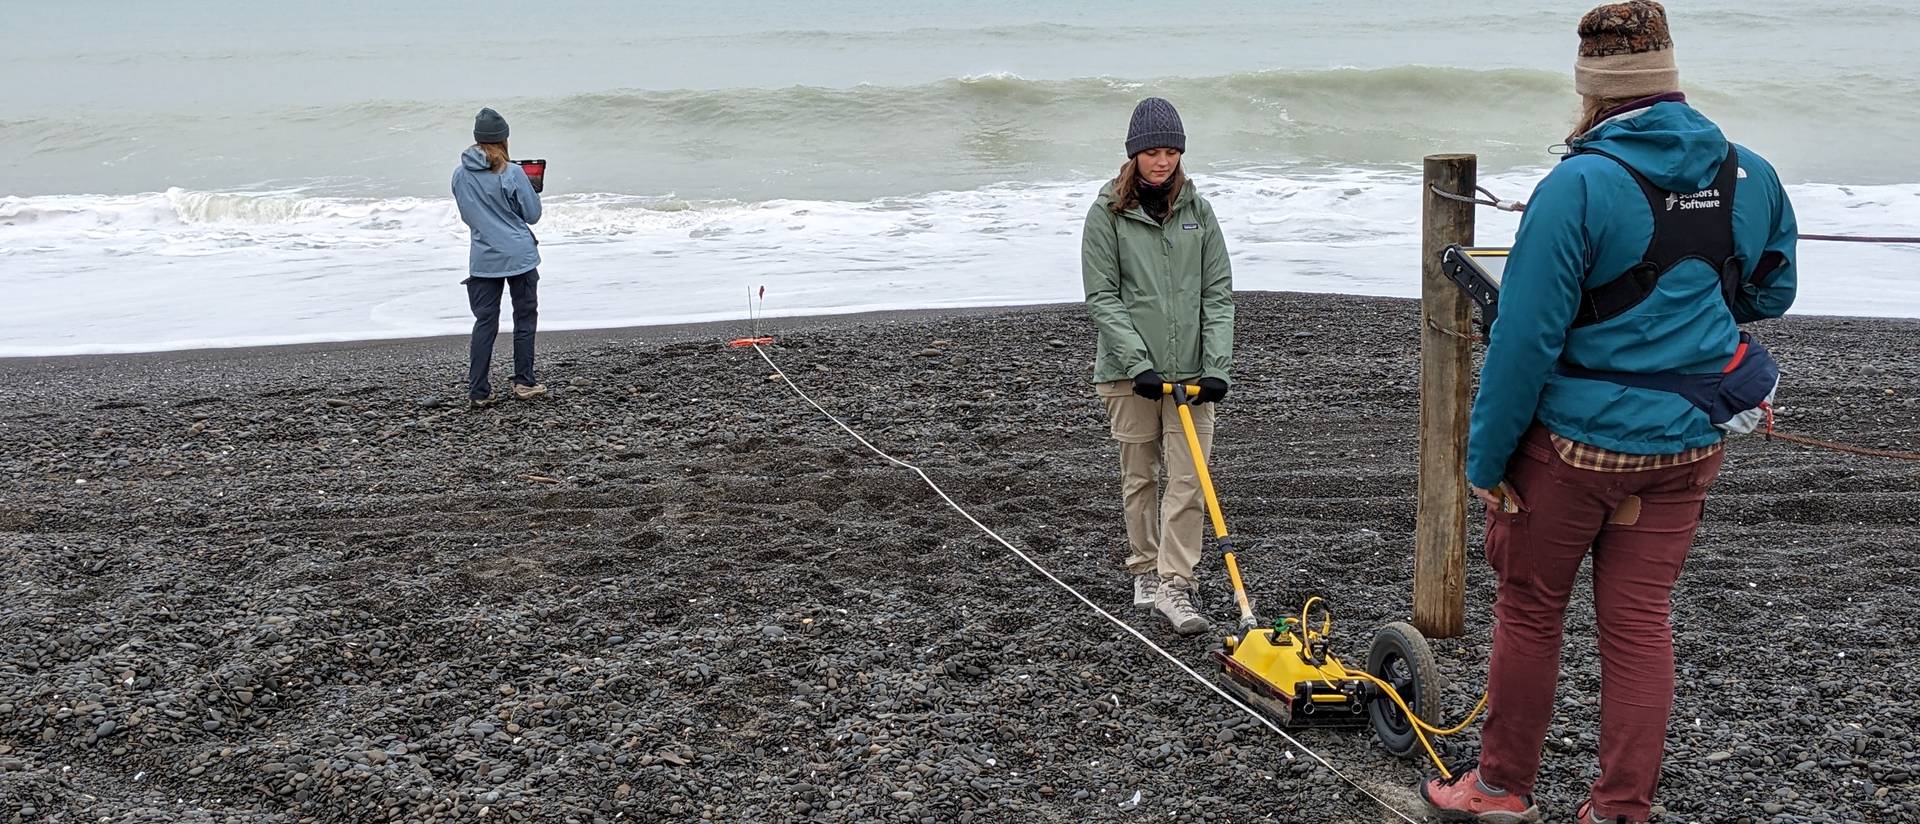 students on a rocky beach using geothermal radar in New Zealand